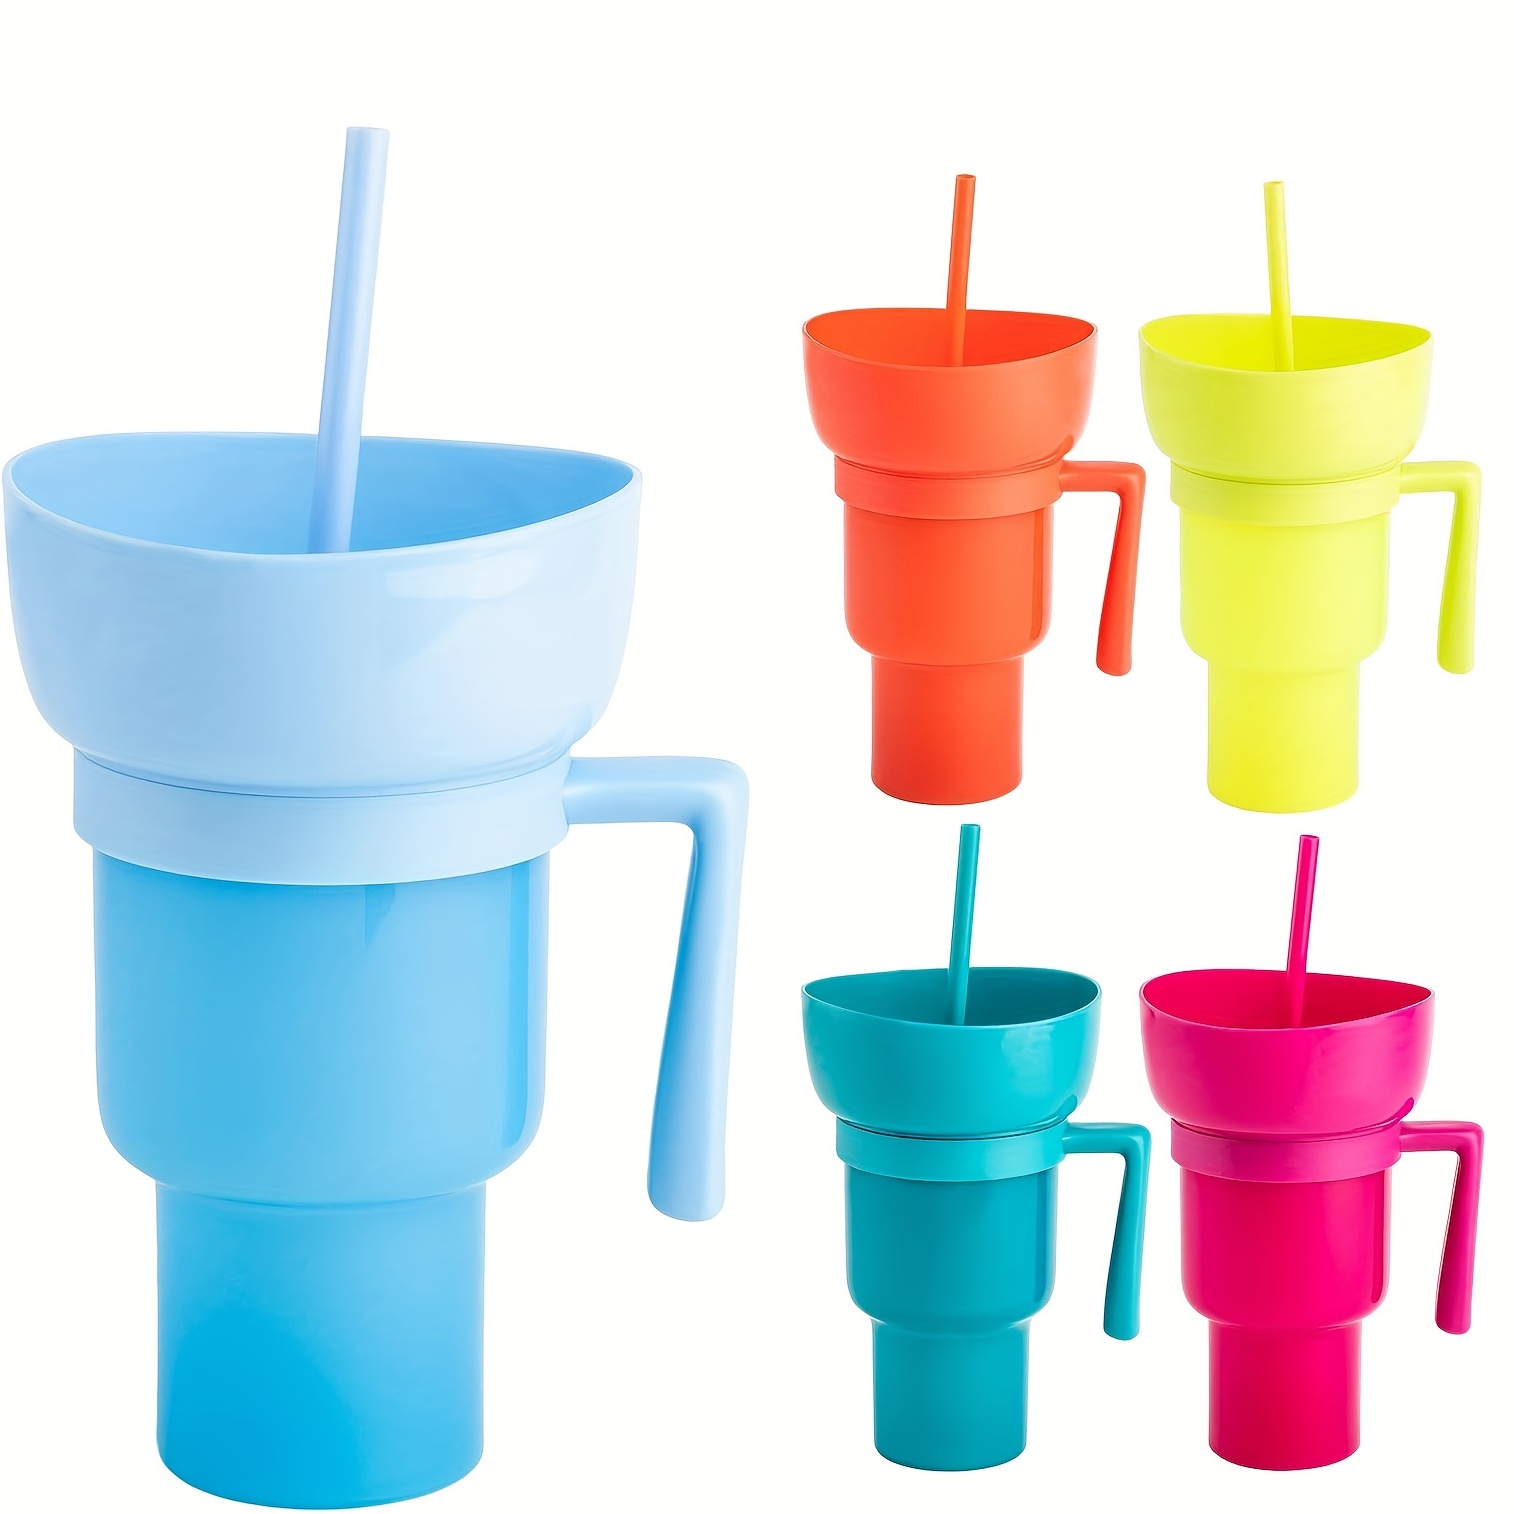 PASUKIT Cup Bowl Combo with Straw, 32oz Stadium Tumbler with Snack Bowl, 2-in-1 Snack and Drink Cups with Straw, Travel Cup with Snack Bowl on Top